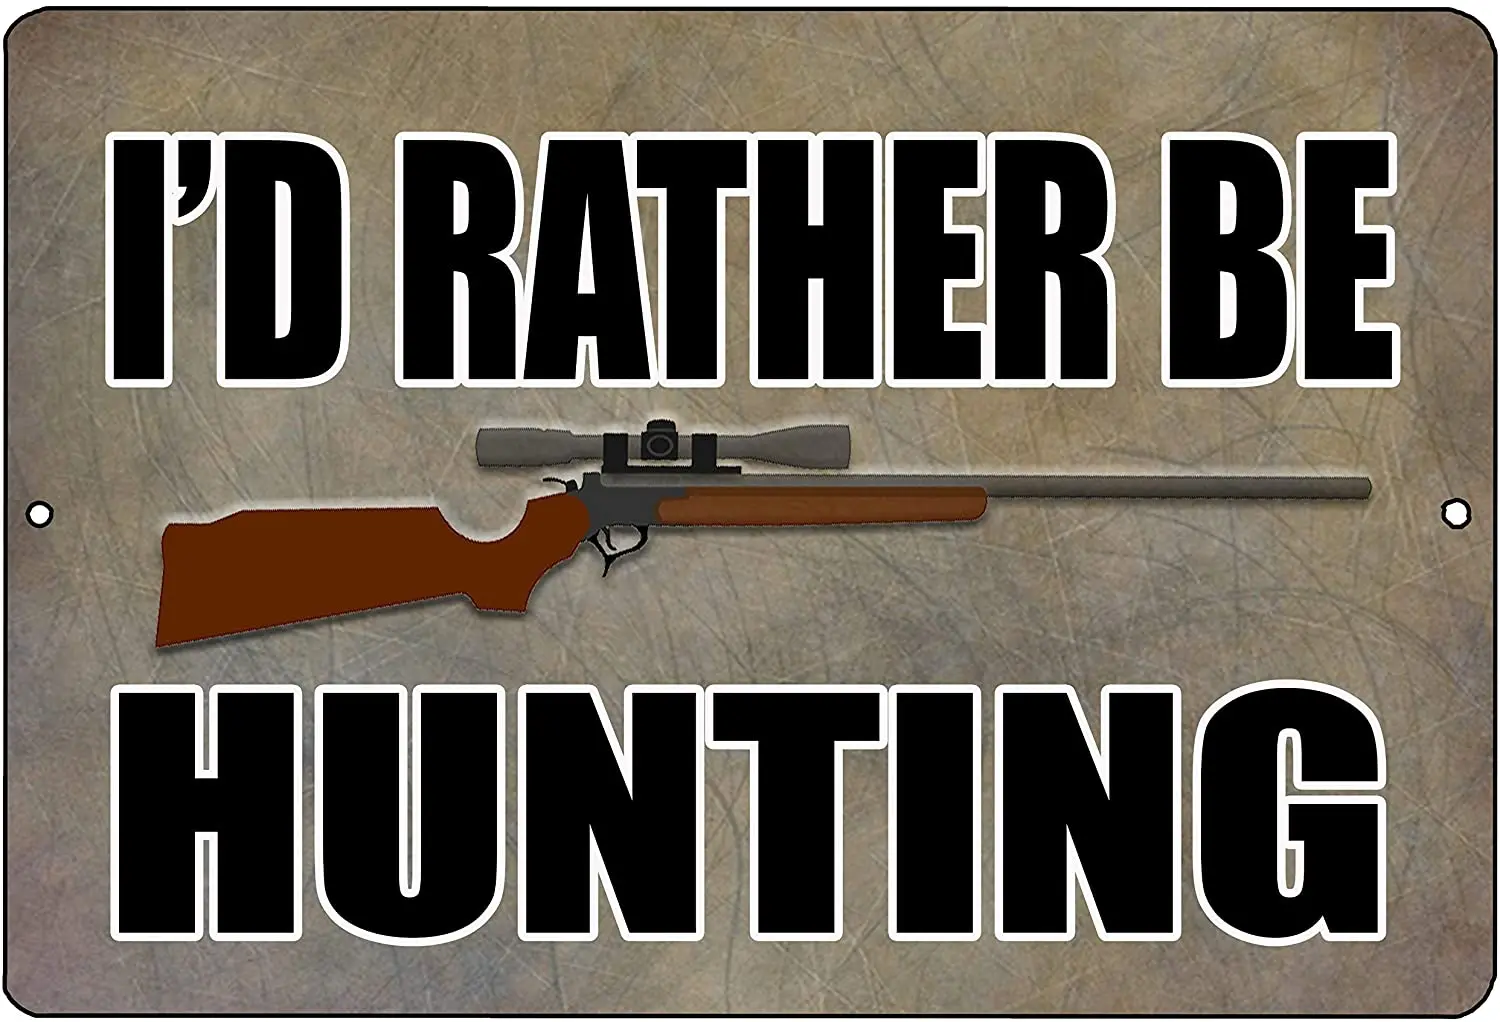 

Hunter I'd Rather Be Hunting Retro Metal Tin Sign Plaque Poster Wall Decor Art Shabby Chic Gift